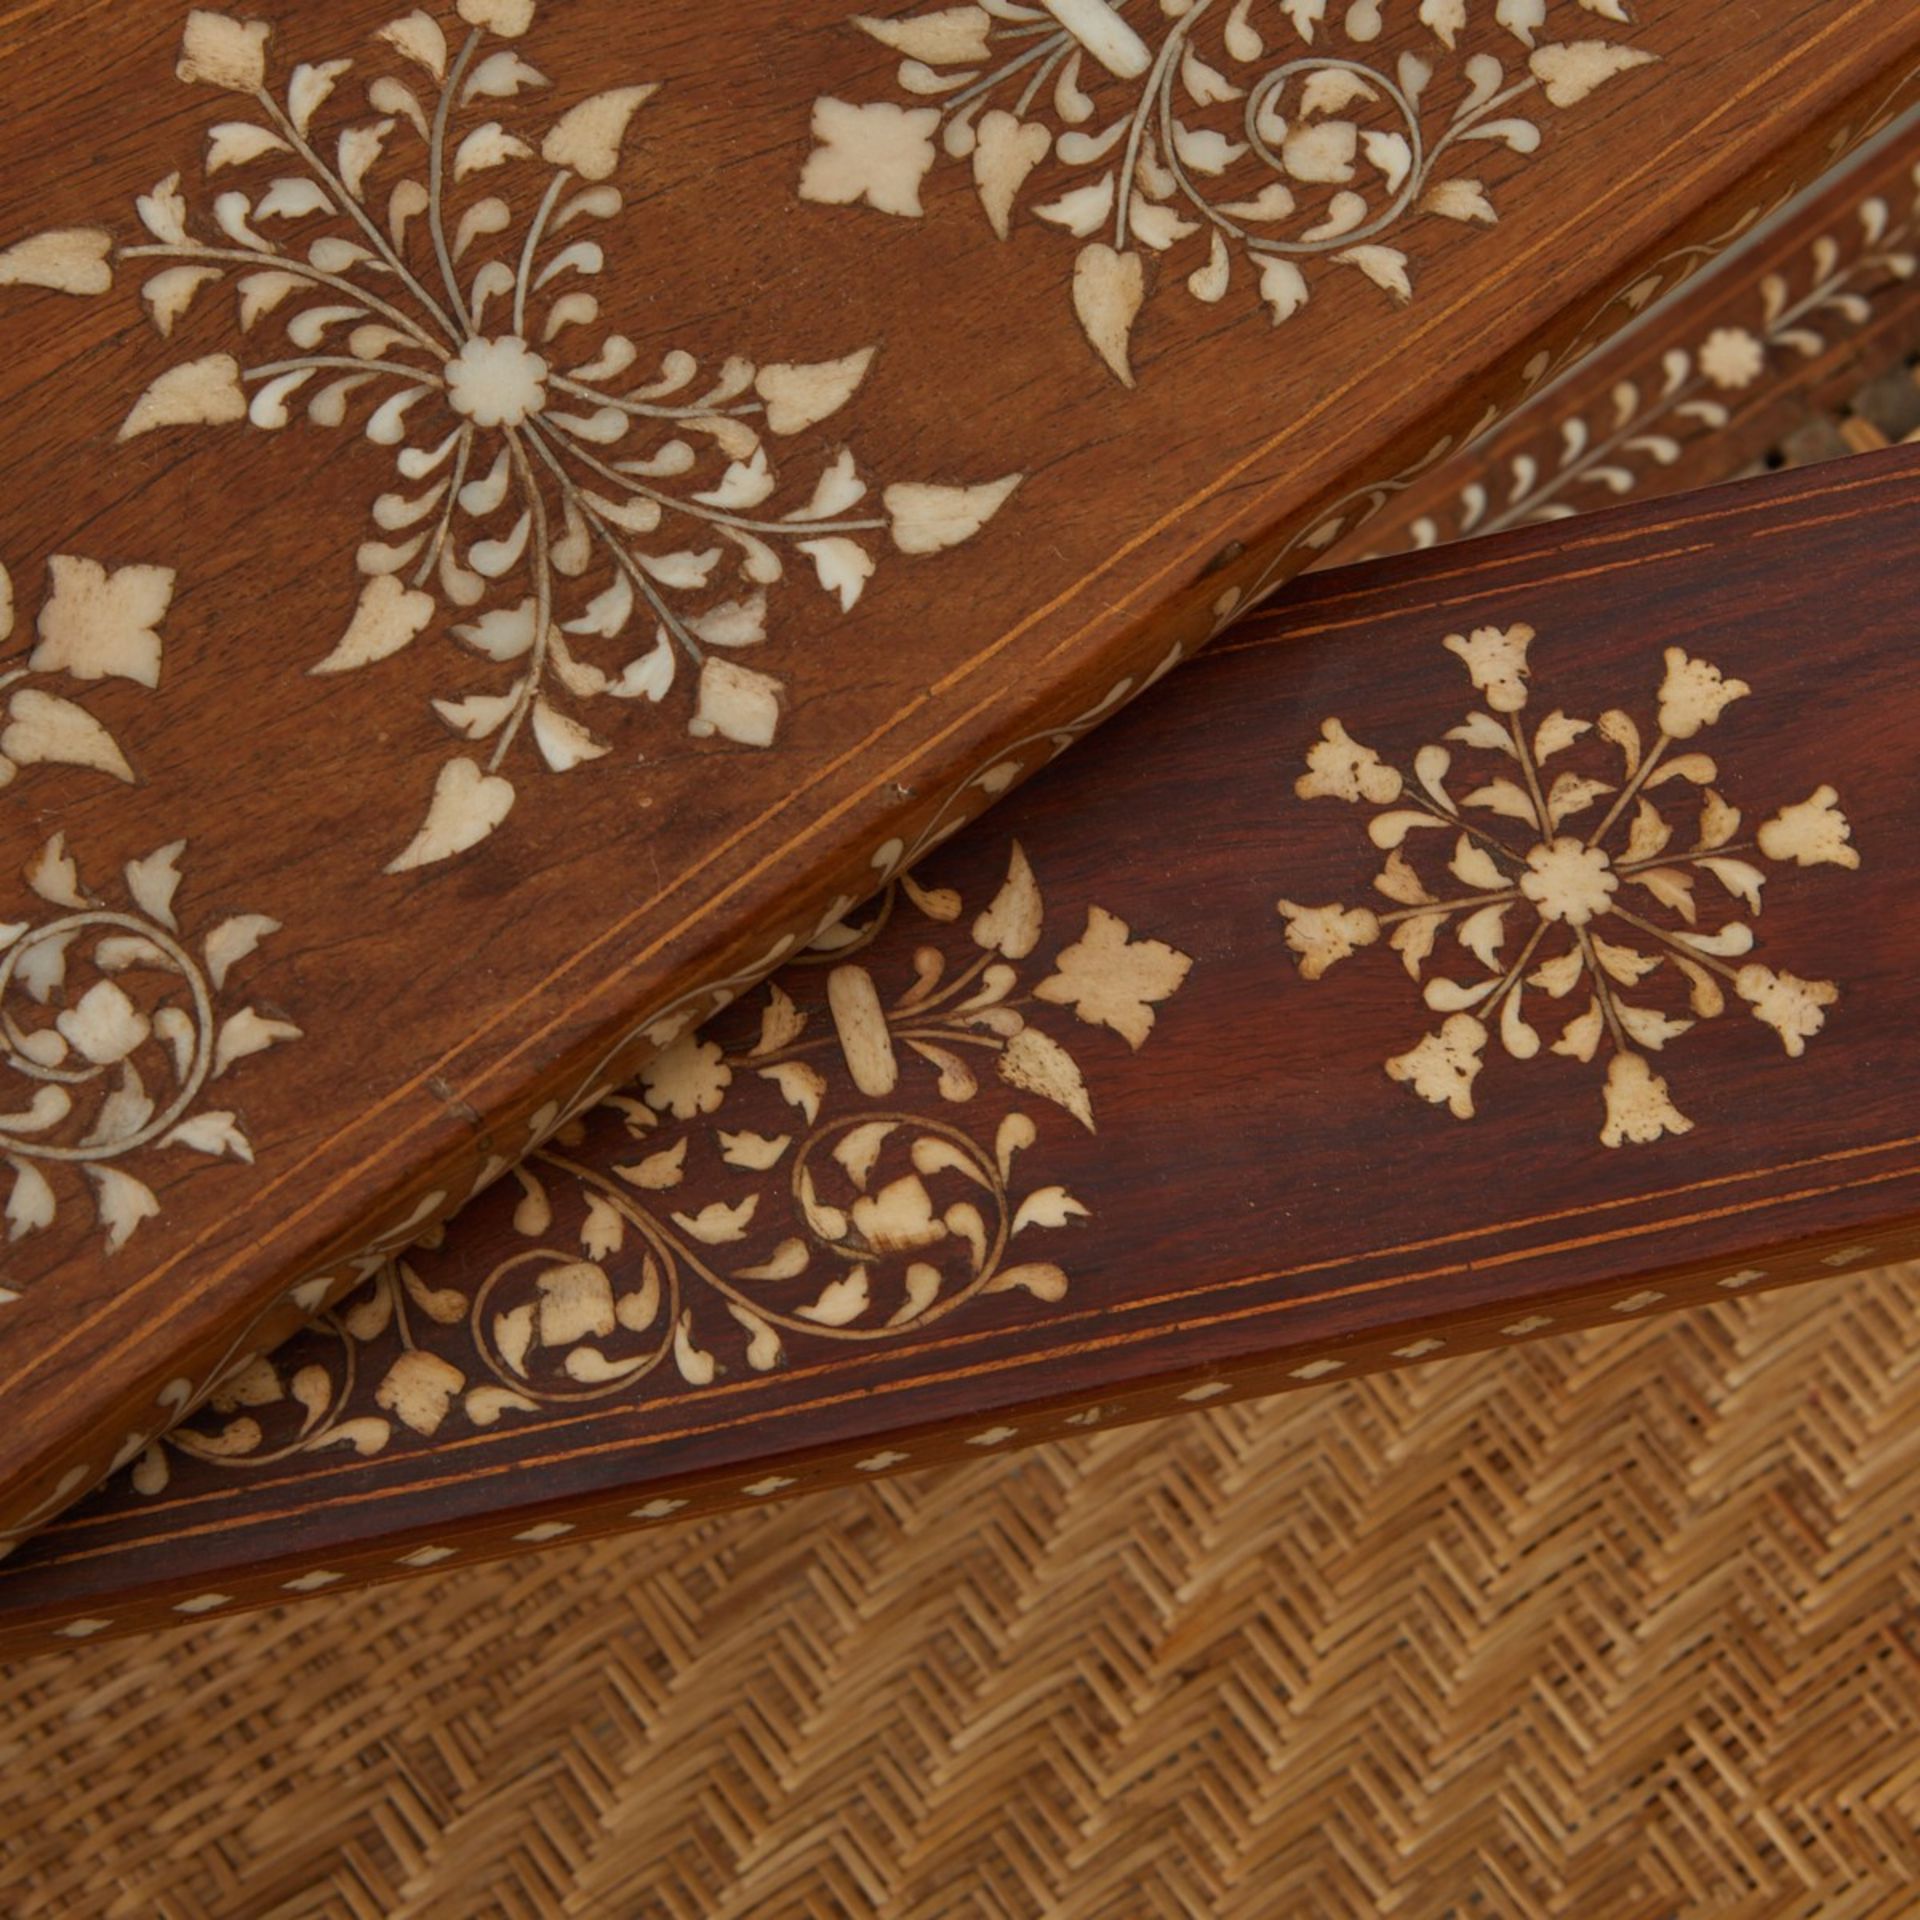 Syrian Inlaid Mother of Pearl Plantation Chair - Image 6 of 16